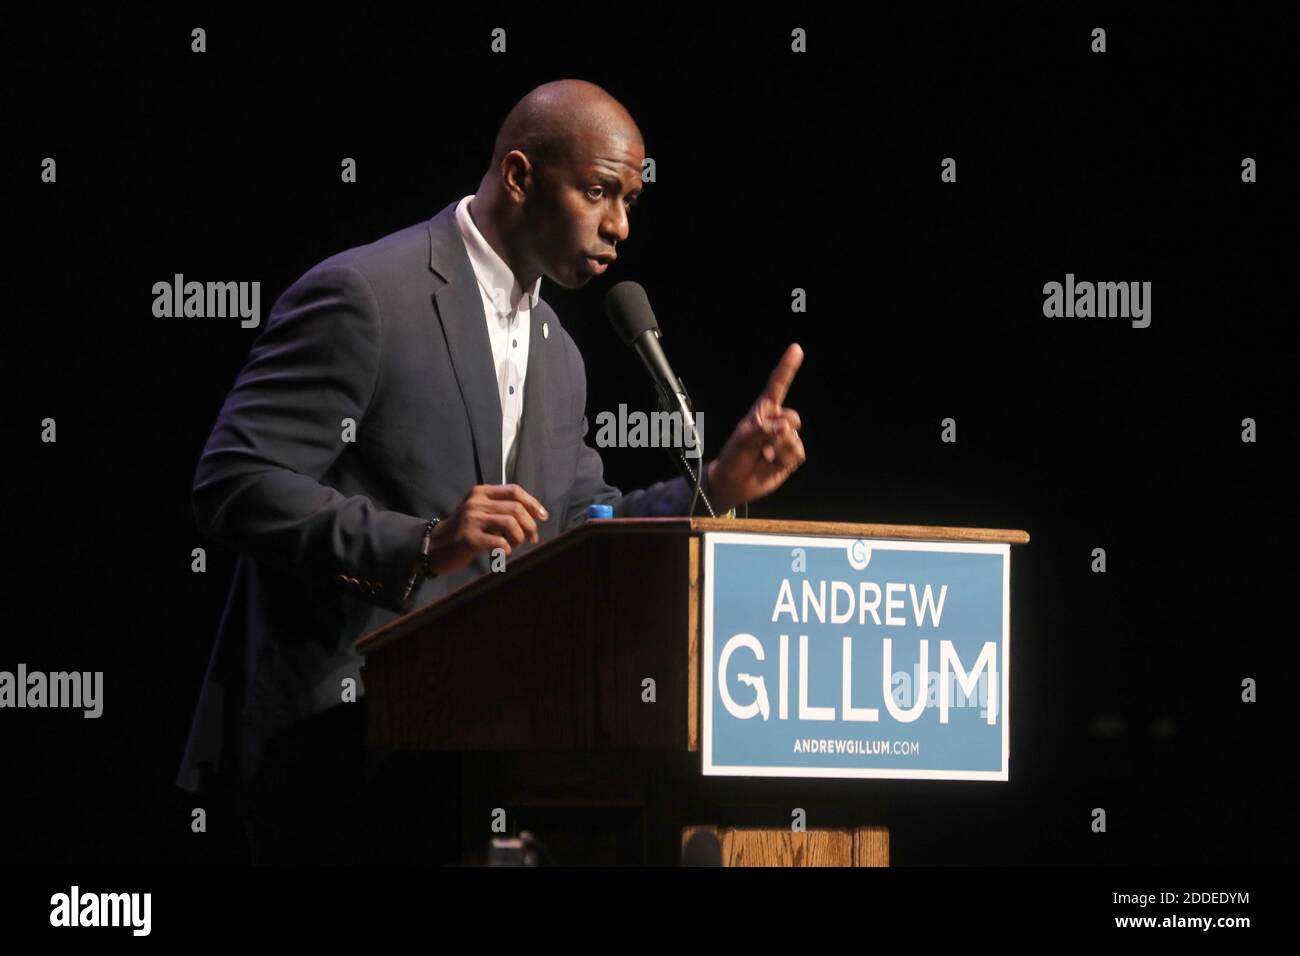 NO FILM, NO VIDEO, NO TV, NO DOCUMENTARY - Democratic candidate for governor Andrew Gillum appears at Florida Atlantic University - so far Palm Beach County's poorest performing early voting site - to encourage early voting Thursday Oct. 25, 2018 in Boca Raton, FL, USA. Photo by Mike Stocker/South Florida Sun-Sentinel/TNS/ABACAPRESS.COM Stock Photo